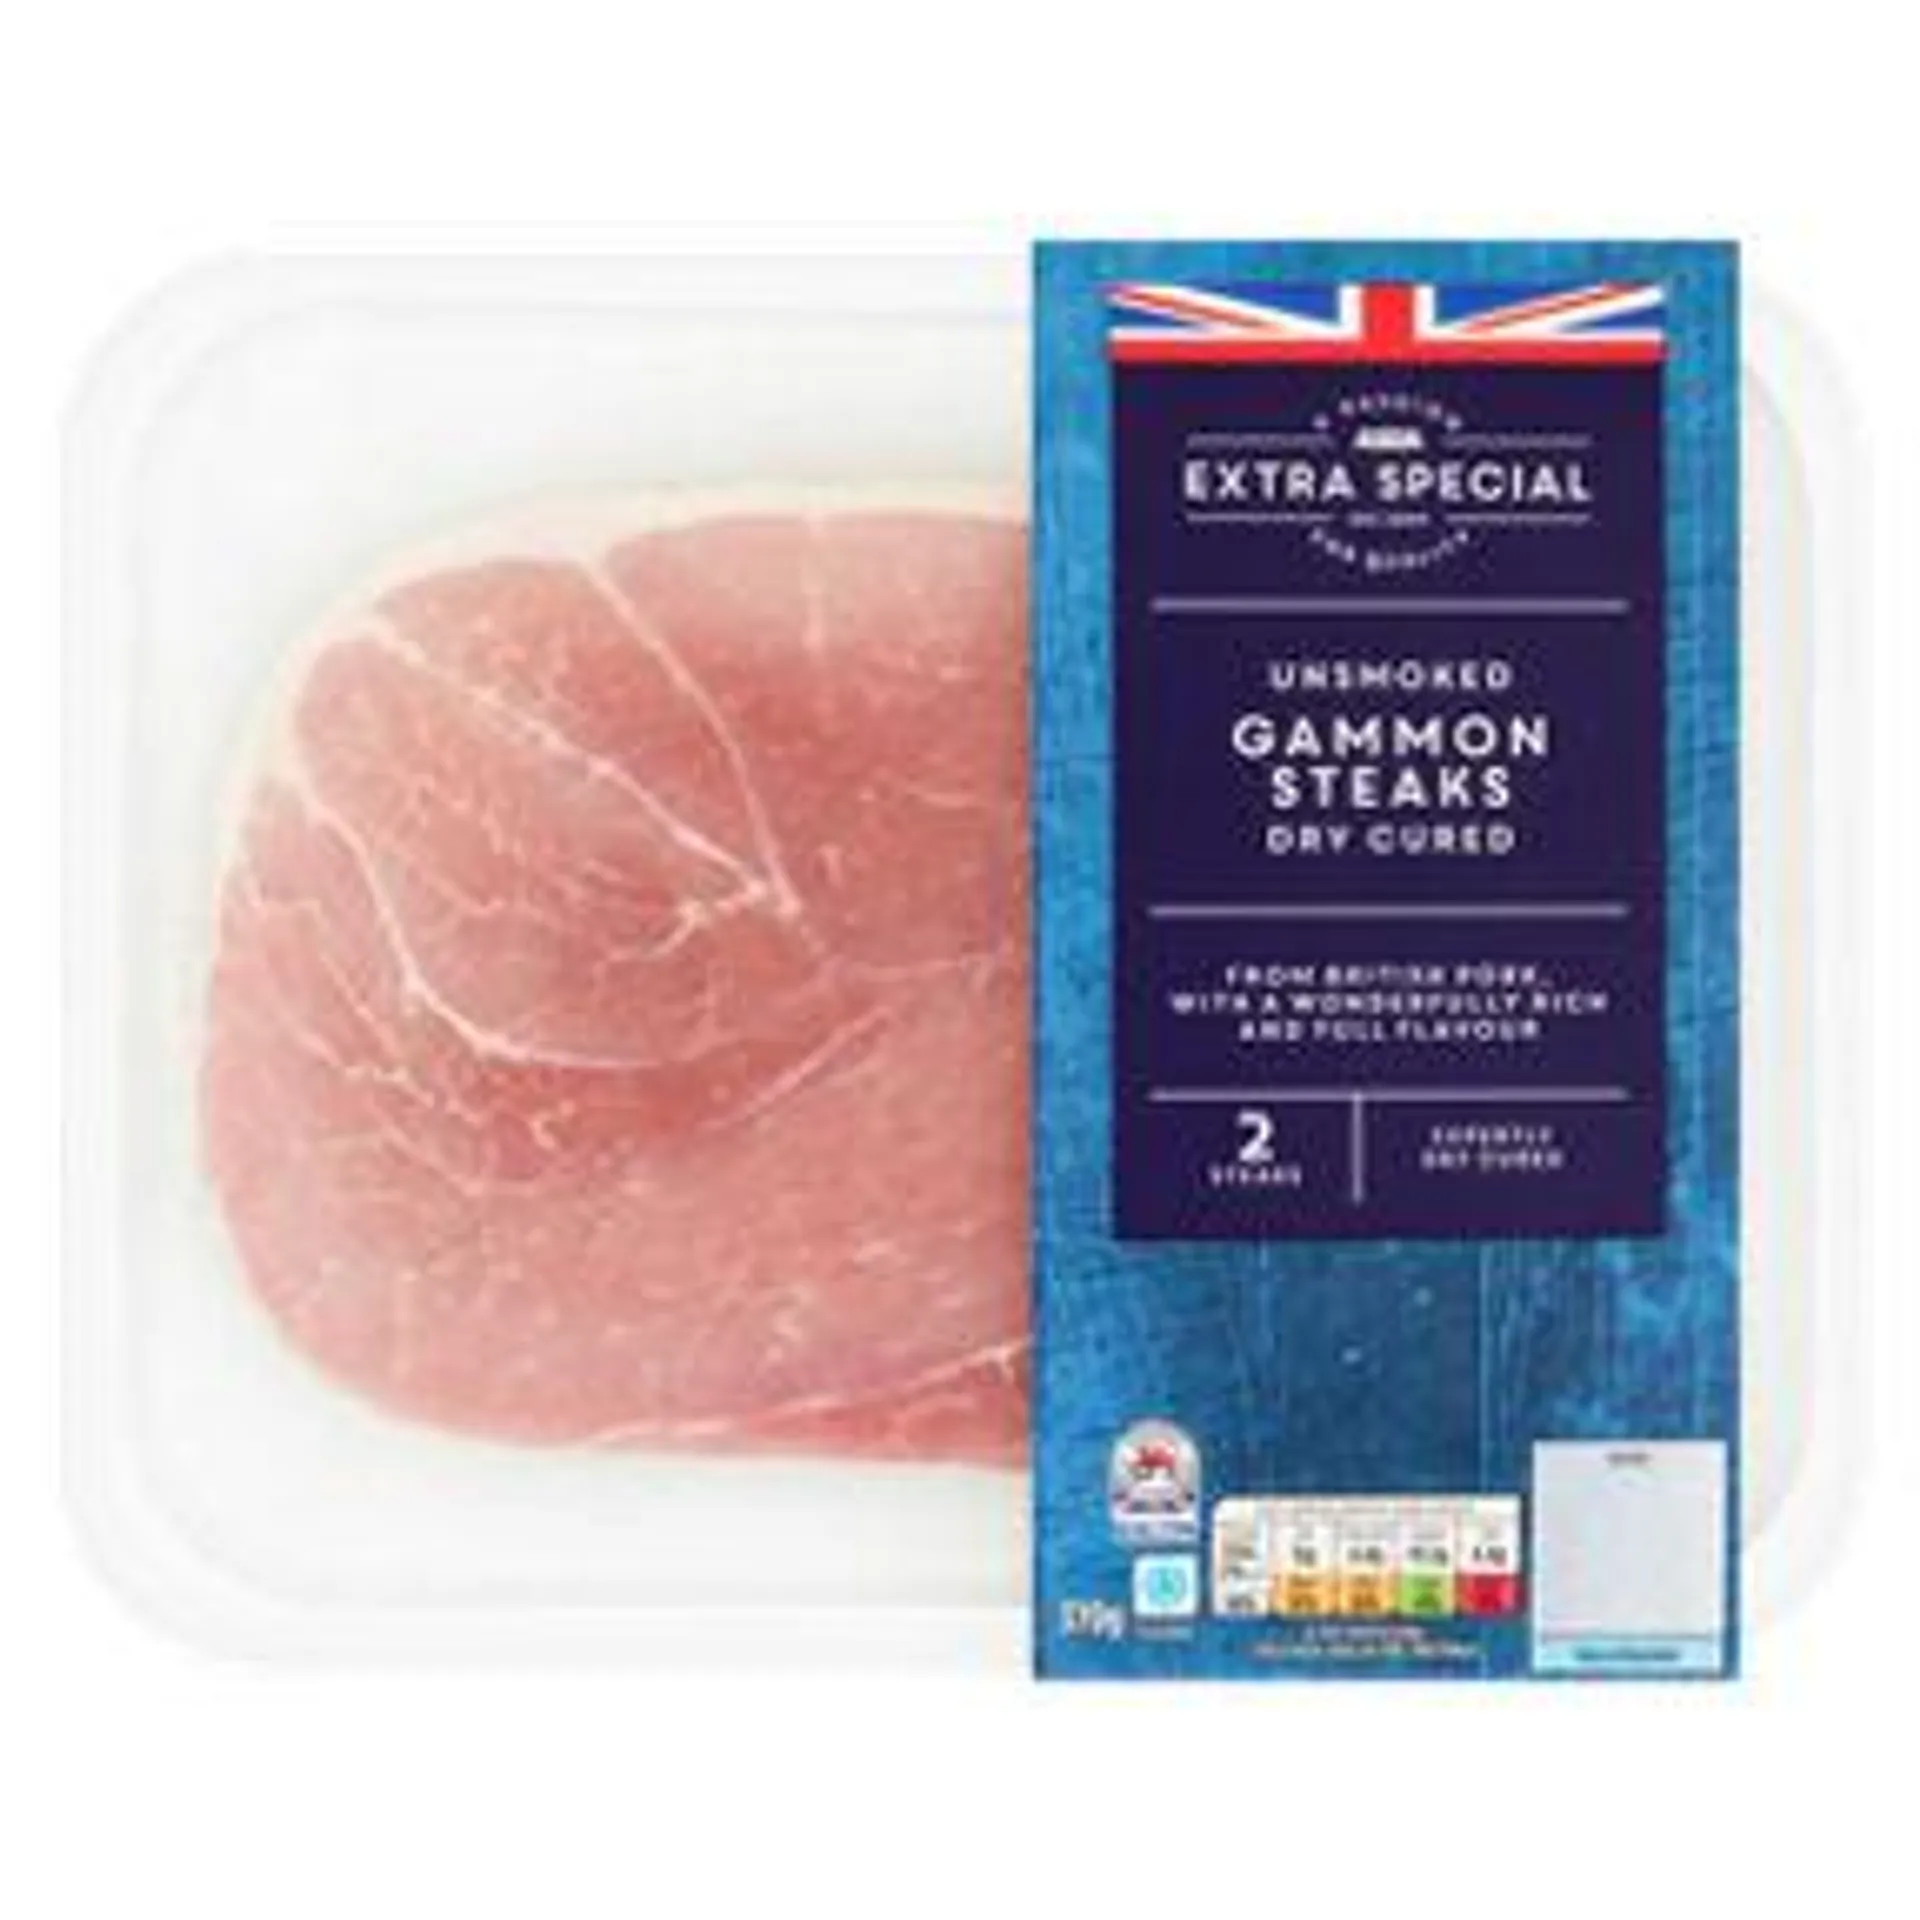 ASDA Extra Special Dry Cured Gammon Steaks Unsmoked